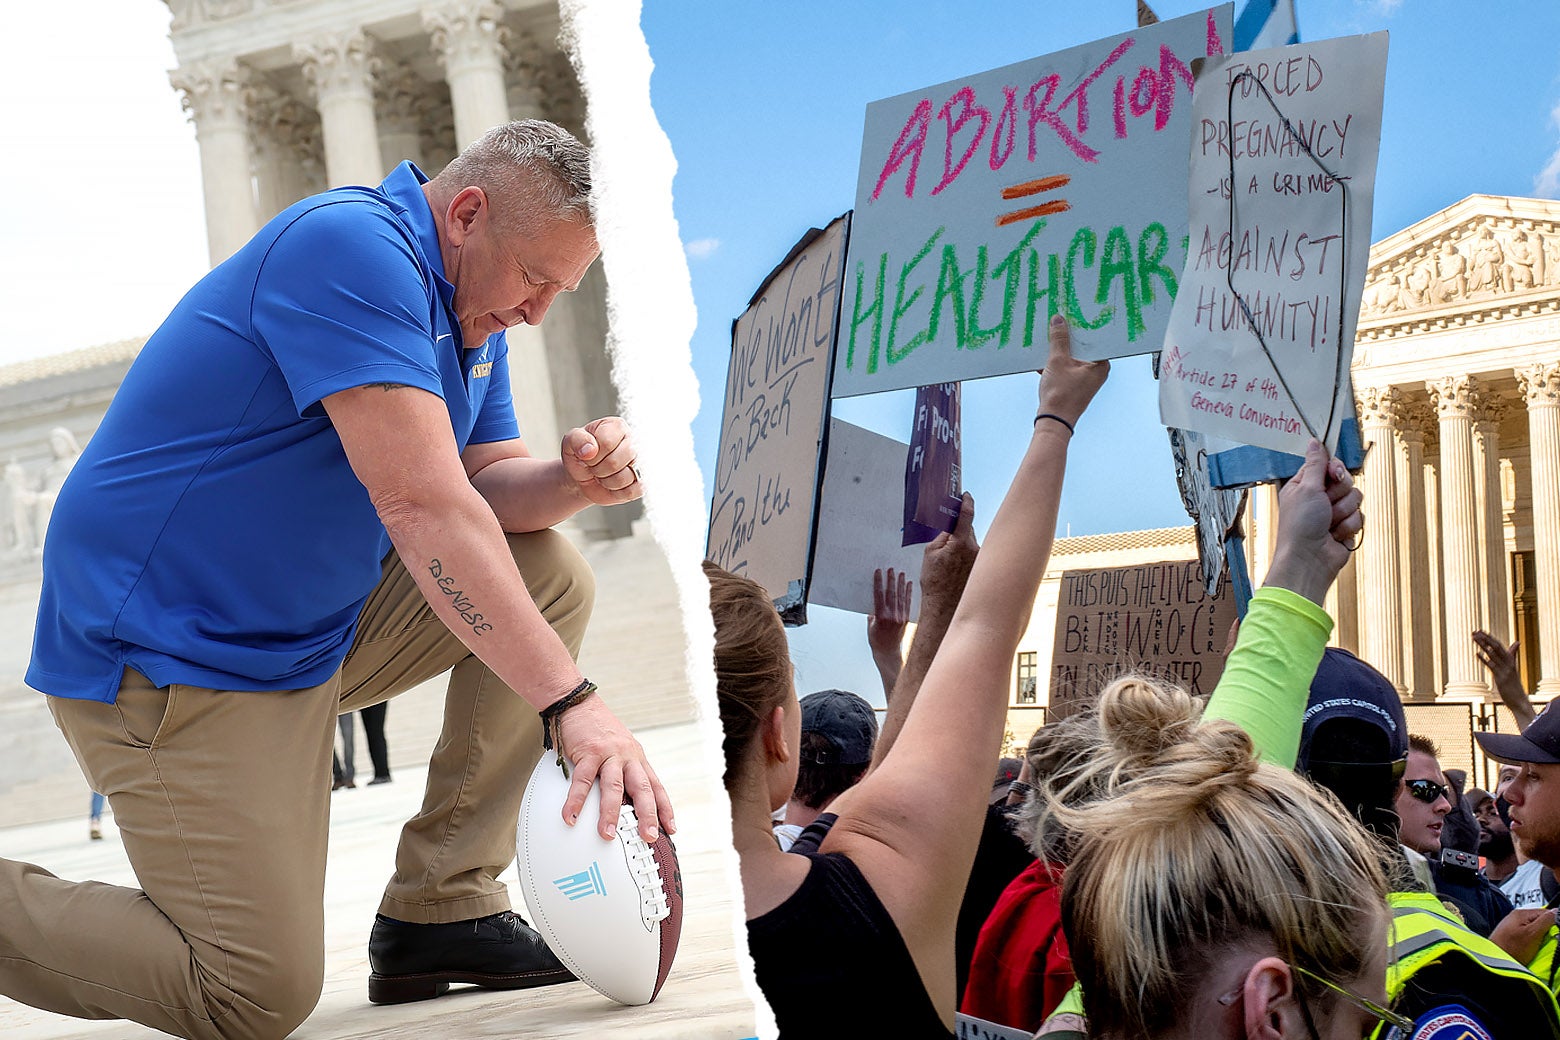 Side-by-side photos of Joseph Kennedy leaning in prayer in front of SCOTUS with a football, and pro-abortion protesters in front of SCOTUS; the photos are shown being torn from each other.